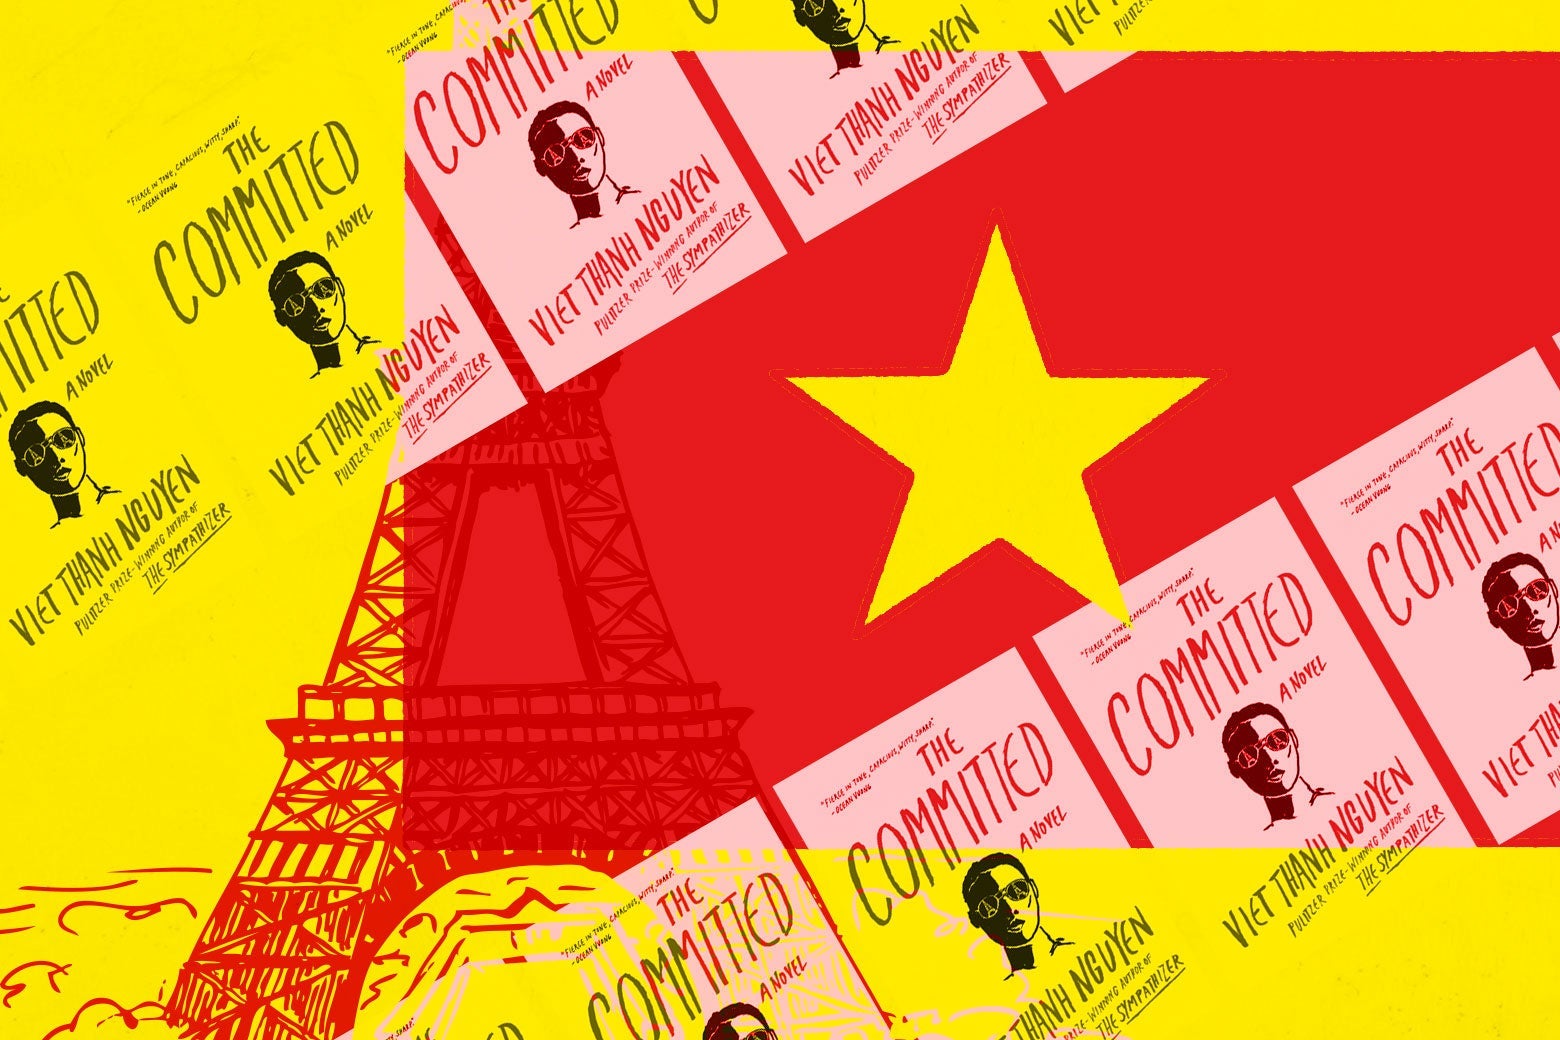 The Vietnam flag and covers of the book The Committed over an illustration of the Eiffel Tower.